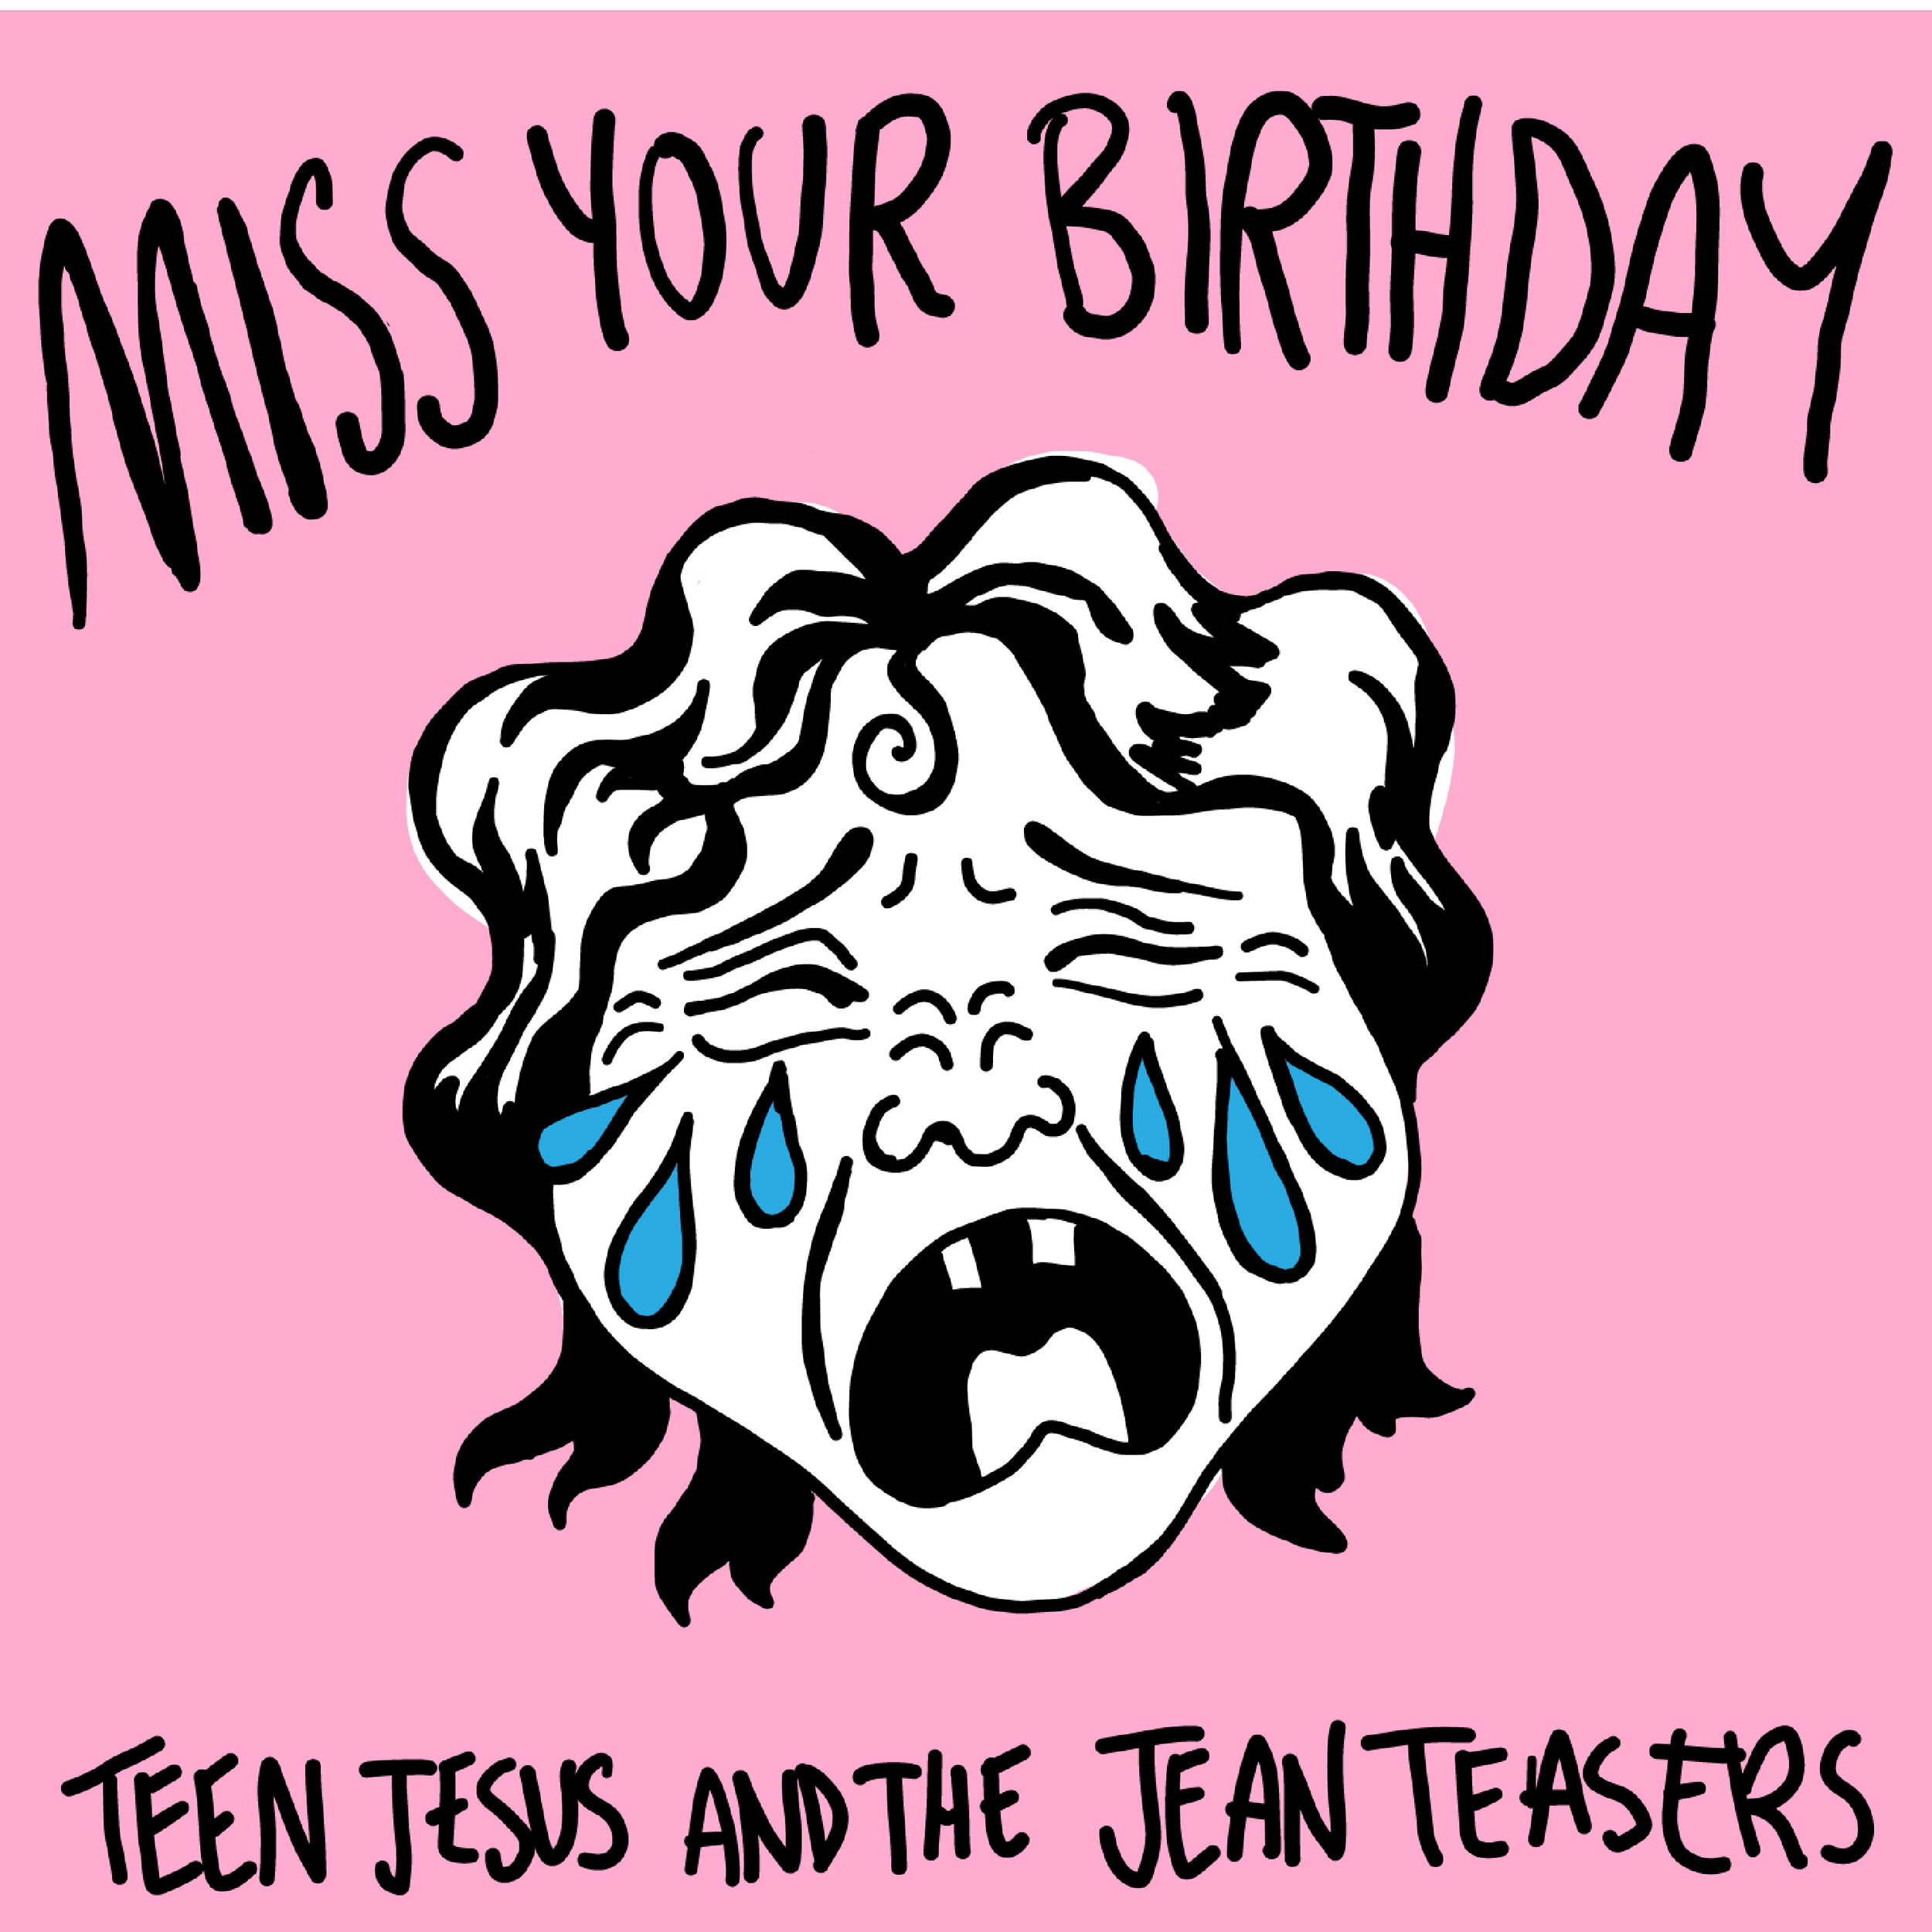 Teen Jesus and the Jean Teasers - “Miss Your Birthday” - Single